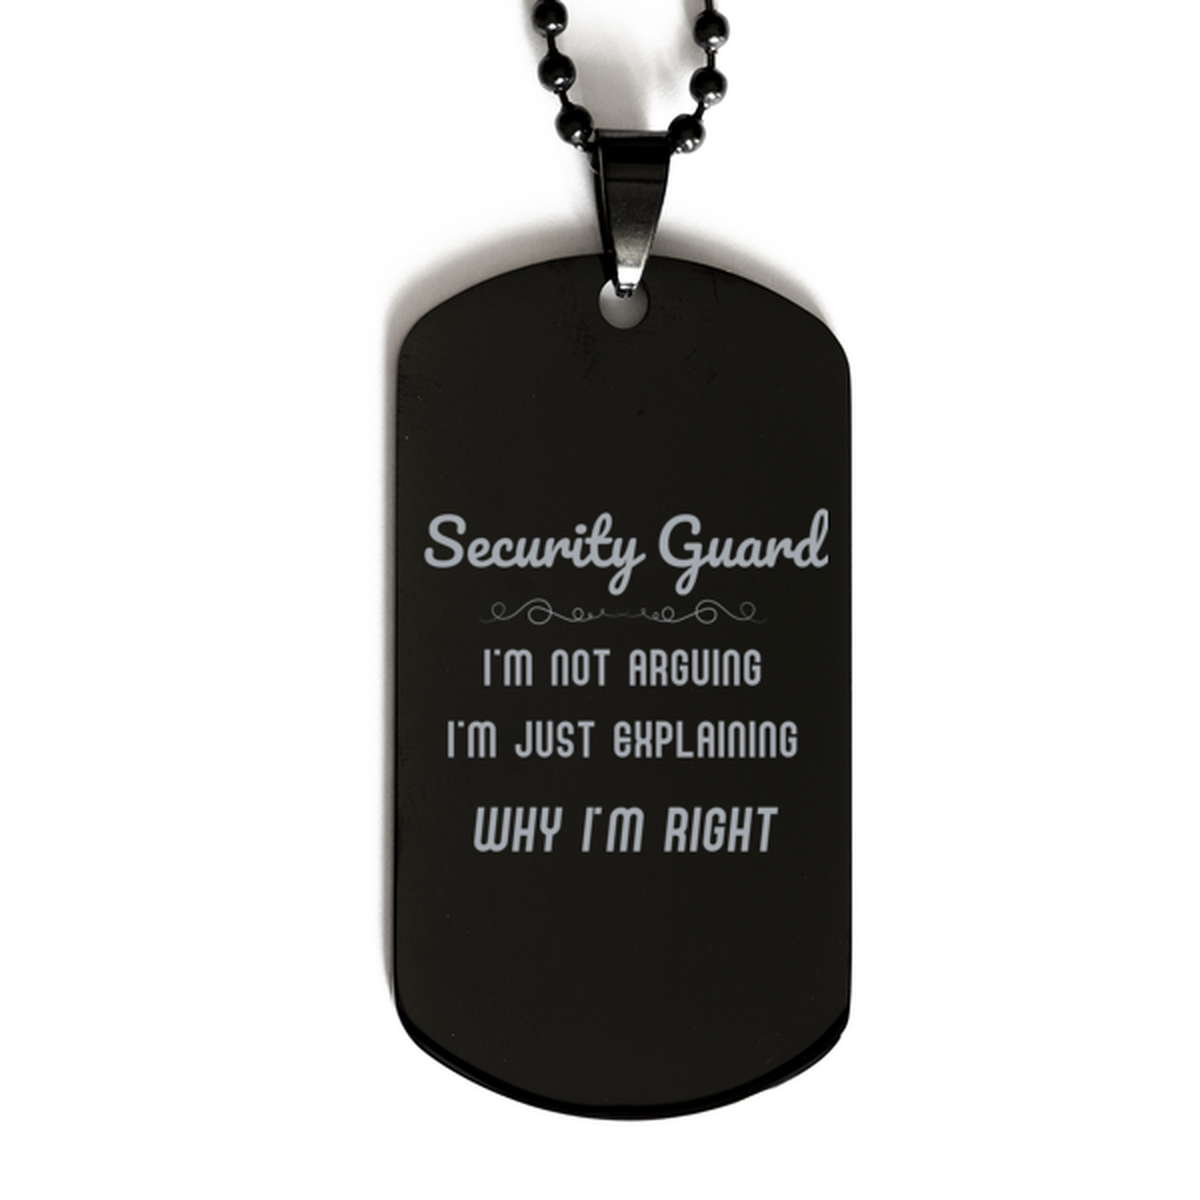 Security Guard I'm not Arguing. I'm Just Explaining Why I'm RIGHT Black Dog Tag, Funny Saying Quote Security Guard Gifts For Security Guard Graduation Birthday Christmas Gifts for Men Women Coworker